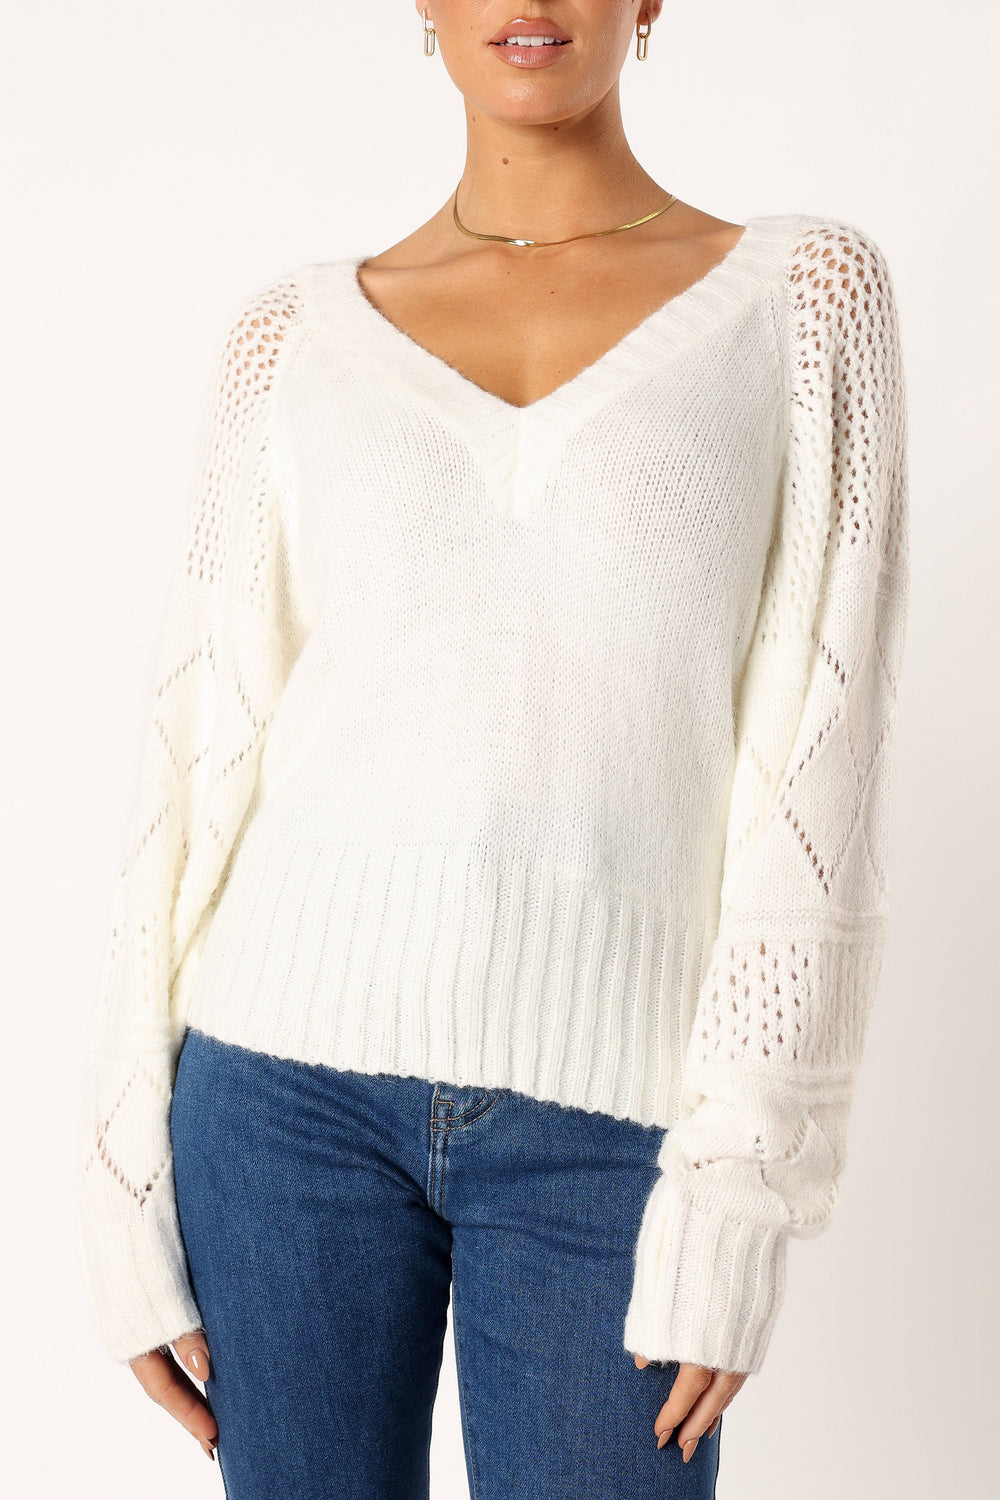 Petal and Pup USA KNITWEAR Lottie V Neck Texture Sleeve Knit Sweater - White